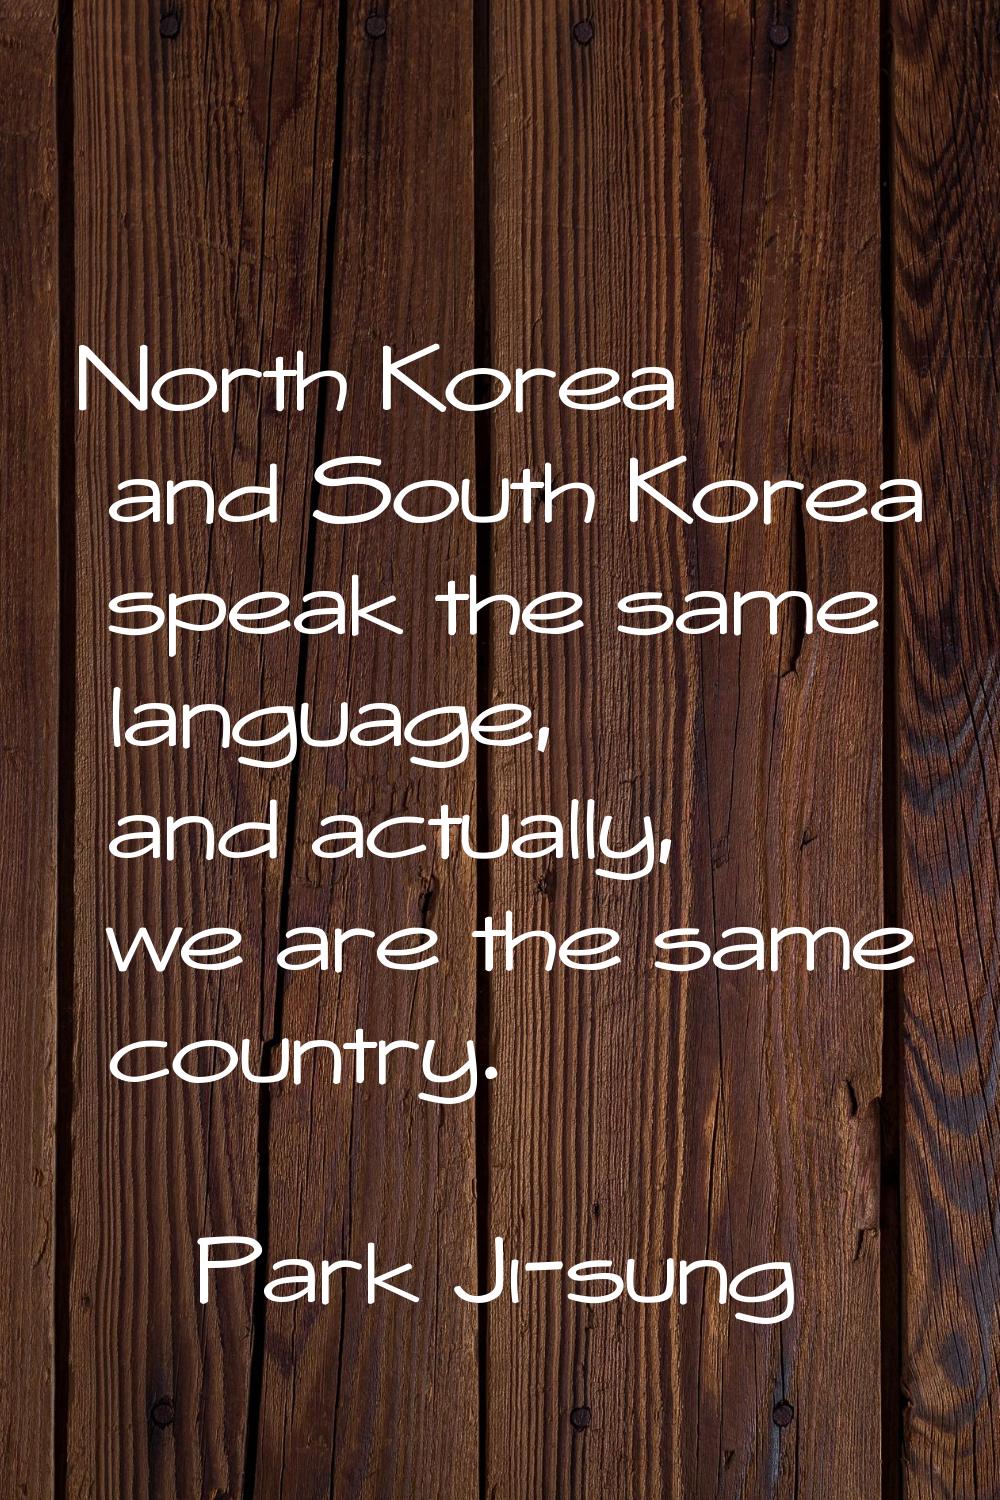 North Korea and South Korea speak the same language, and actually, we are the same country.